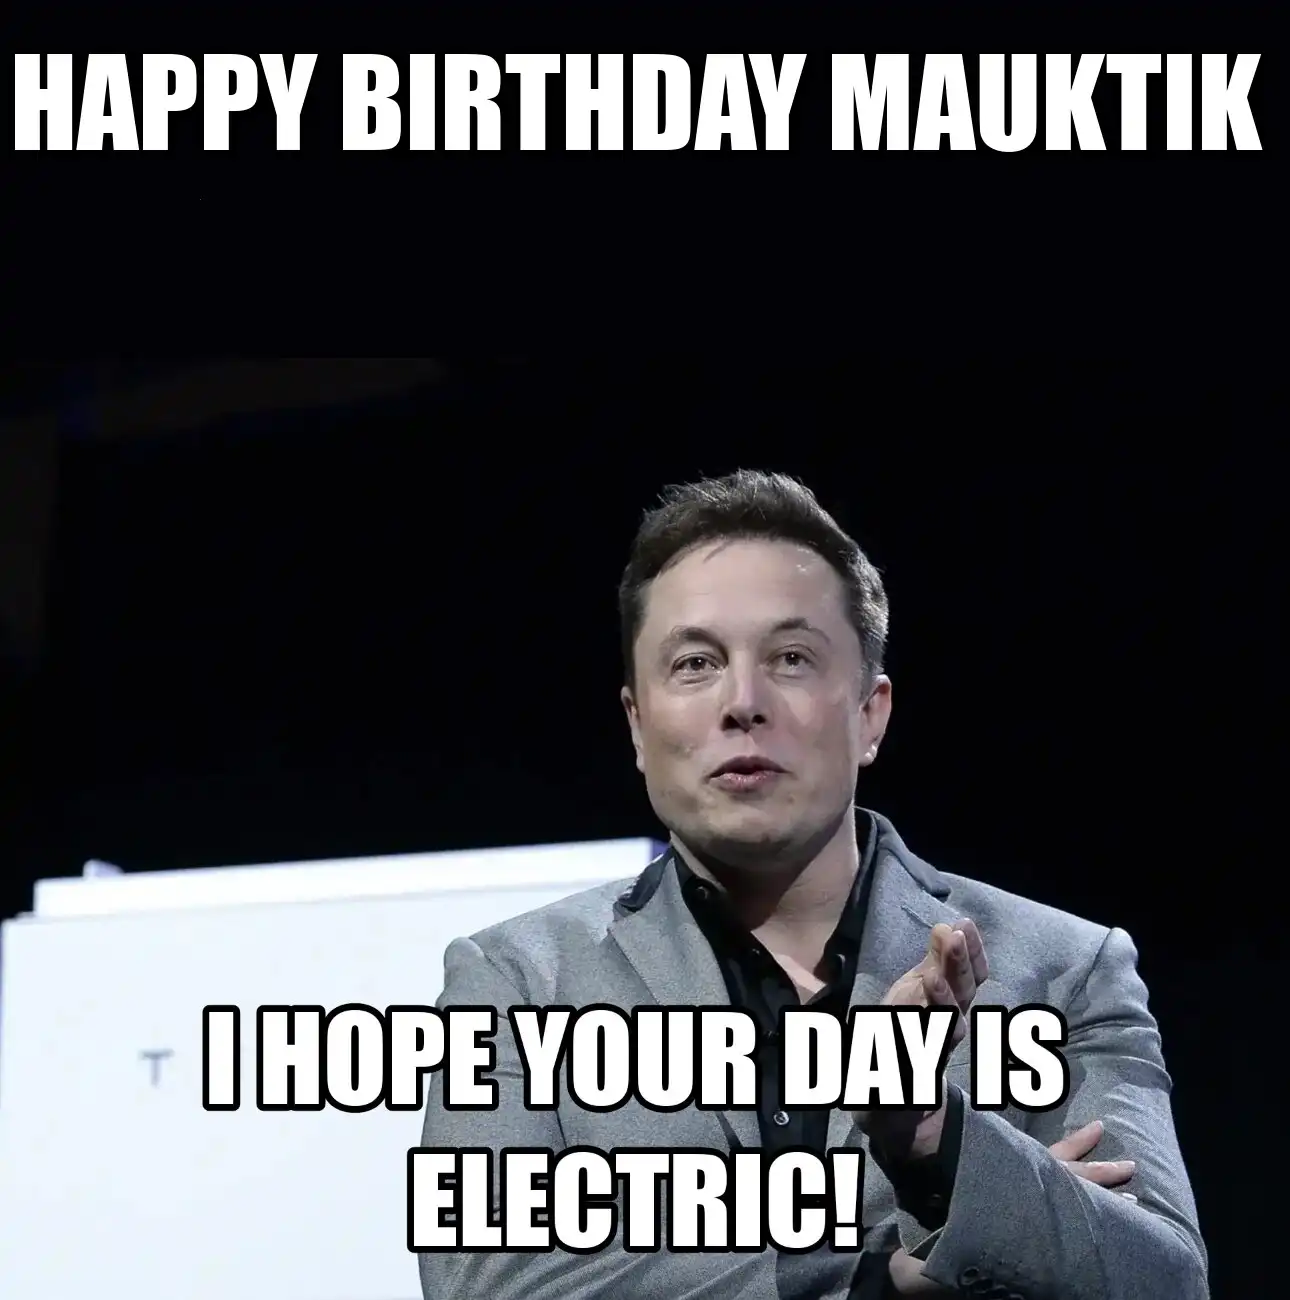 Happy Birthday Mauktik I Hope Your Day Is Electric Meme